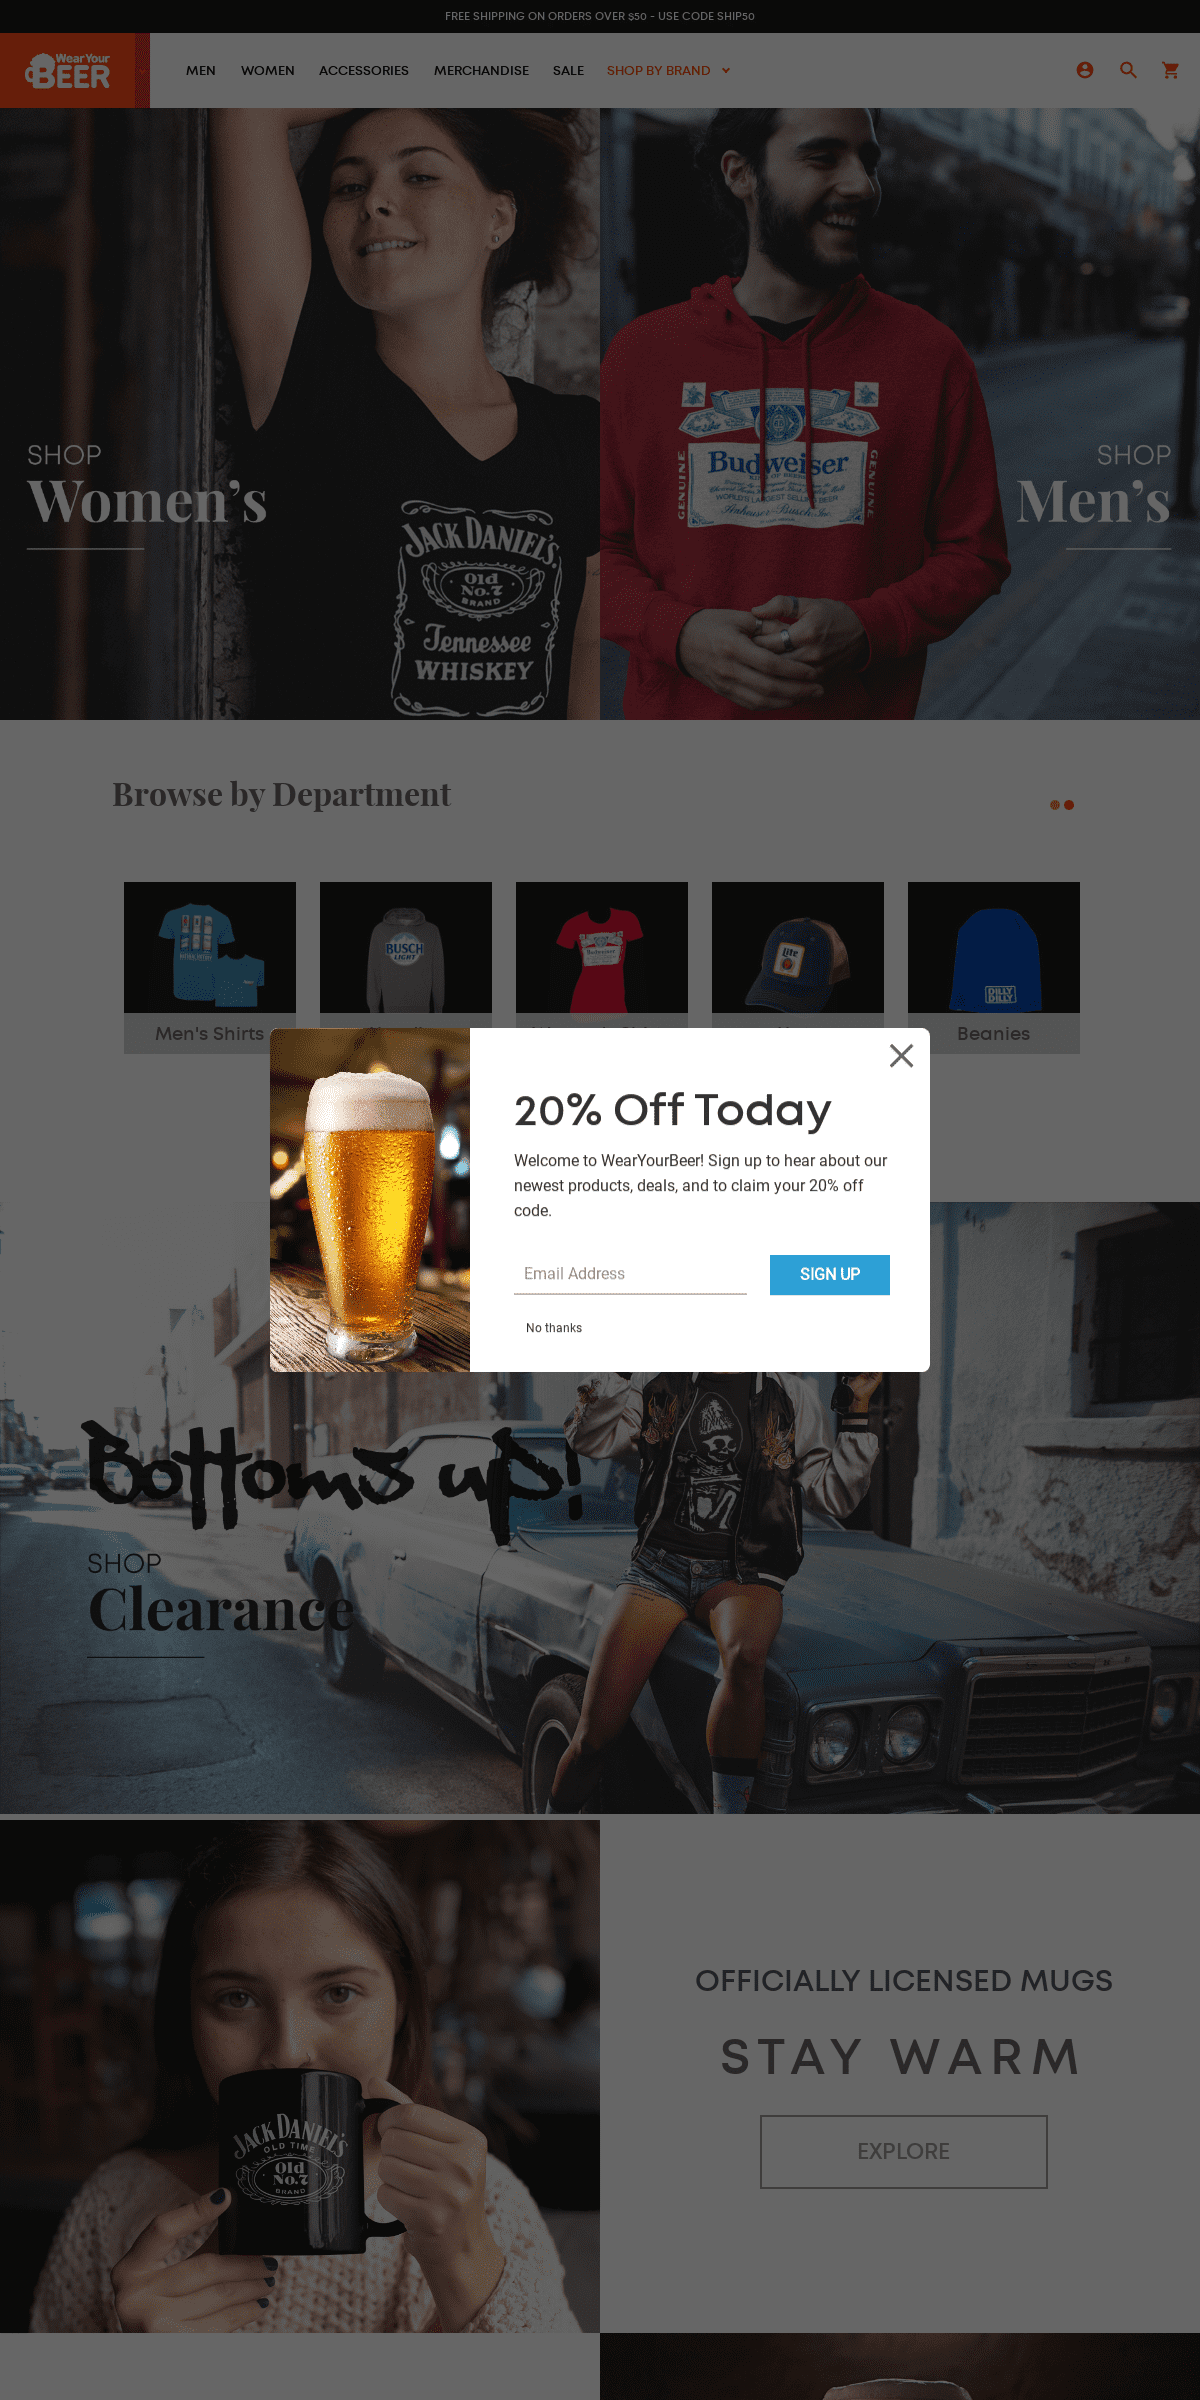 A complete backup of wearyourbeer.com